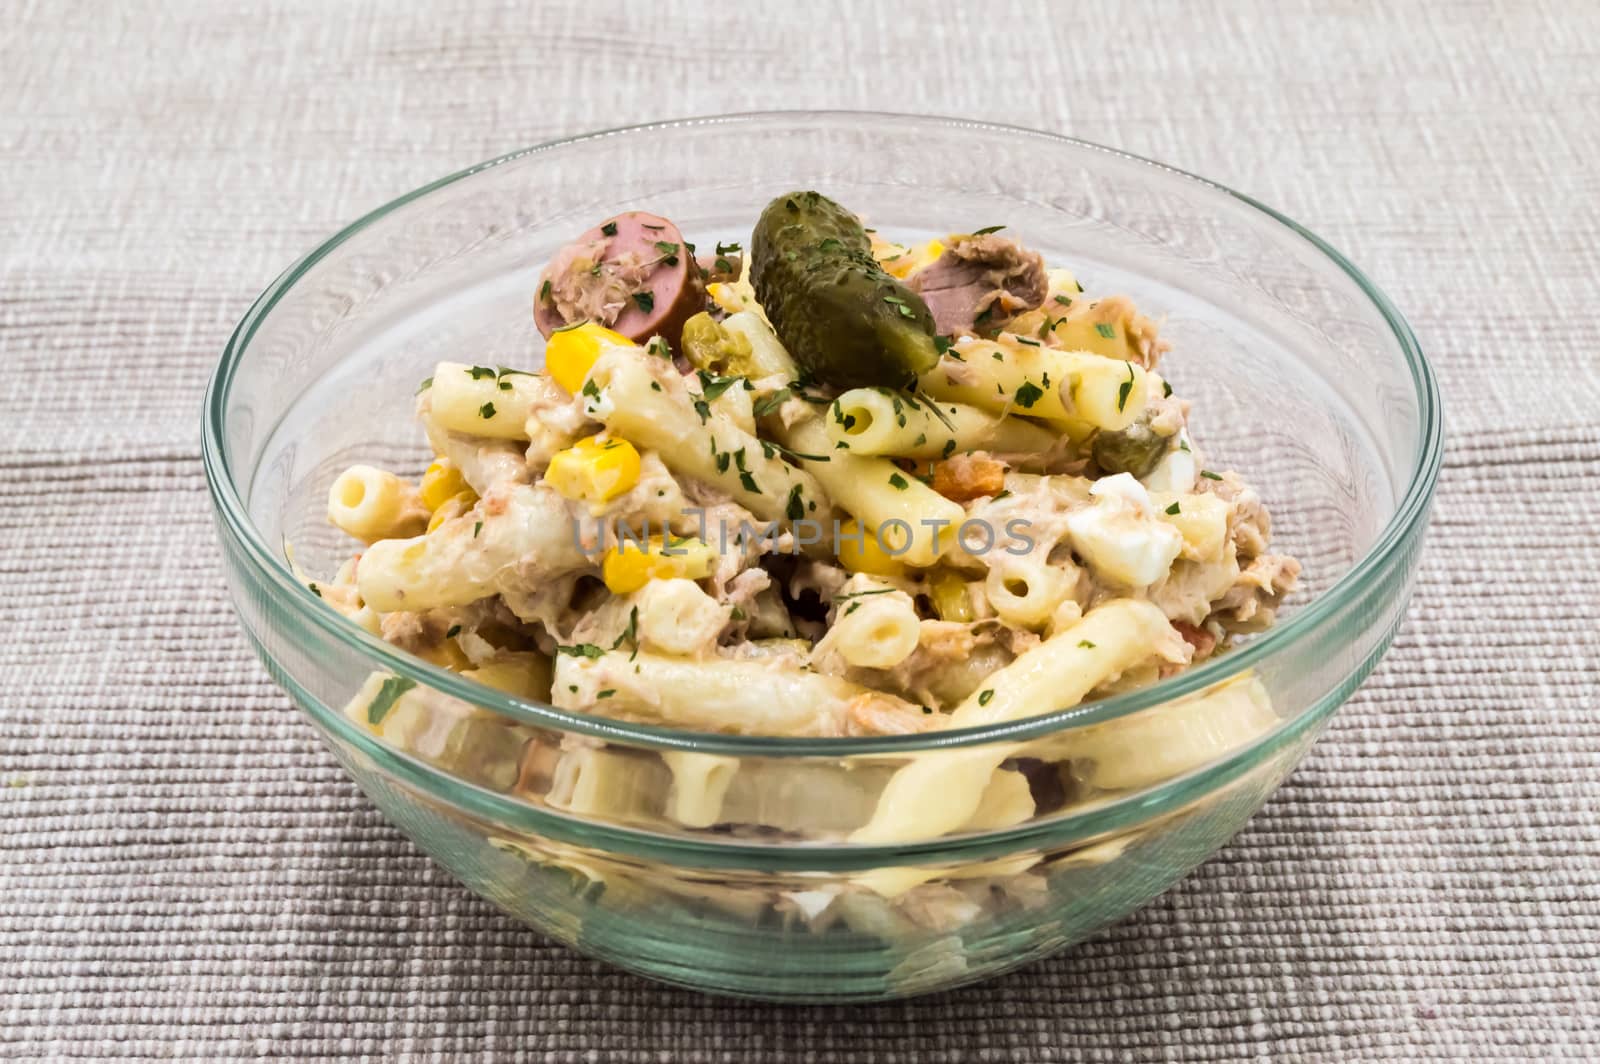 Pasta salad dish with corn, tuna and a pickle  by Philou1000